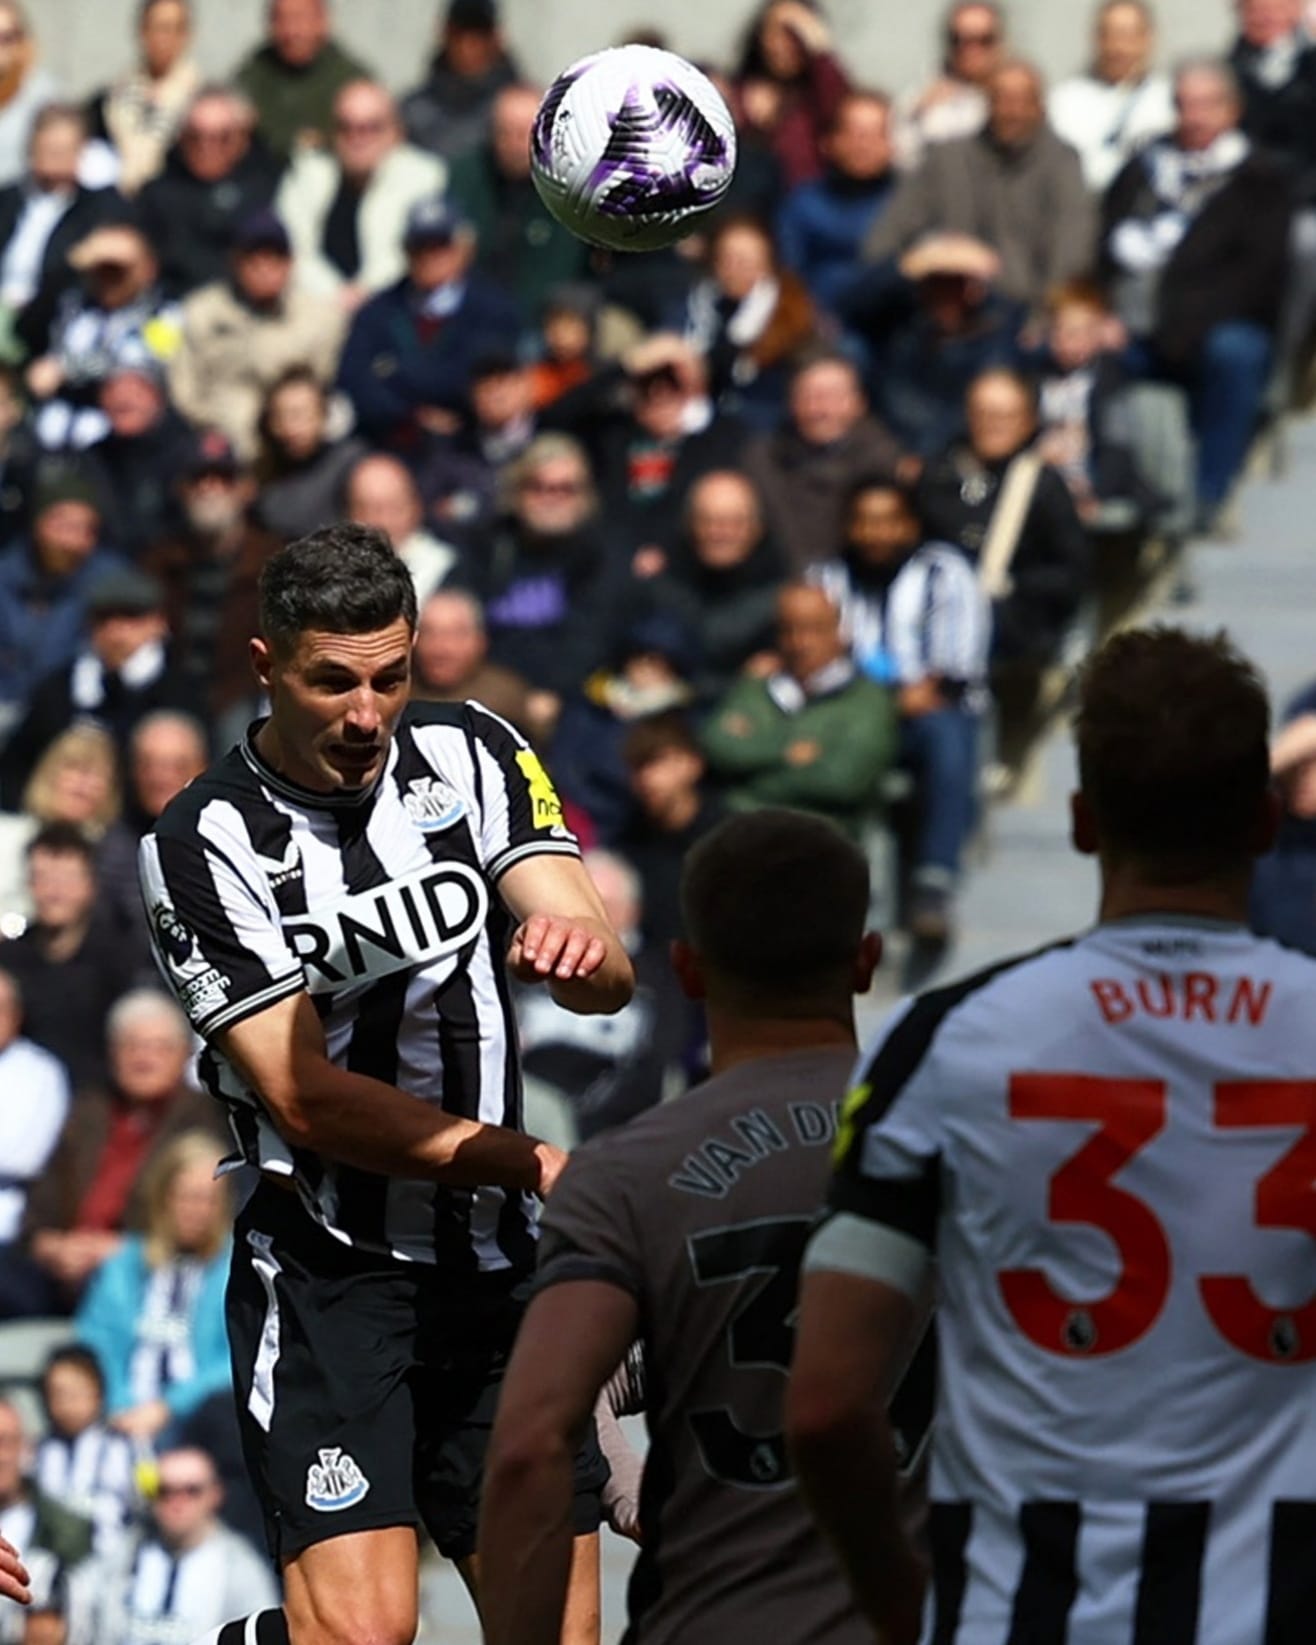 EPL: Newcastle wallop Spurs 4-0 to dent their Champions League hopes